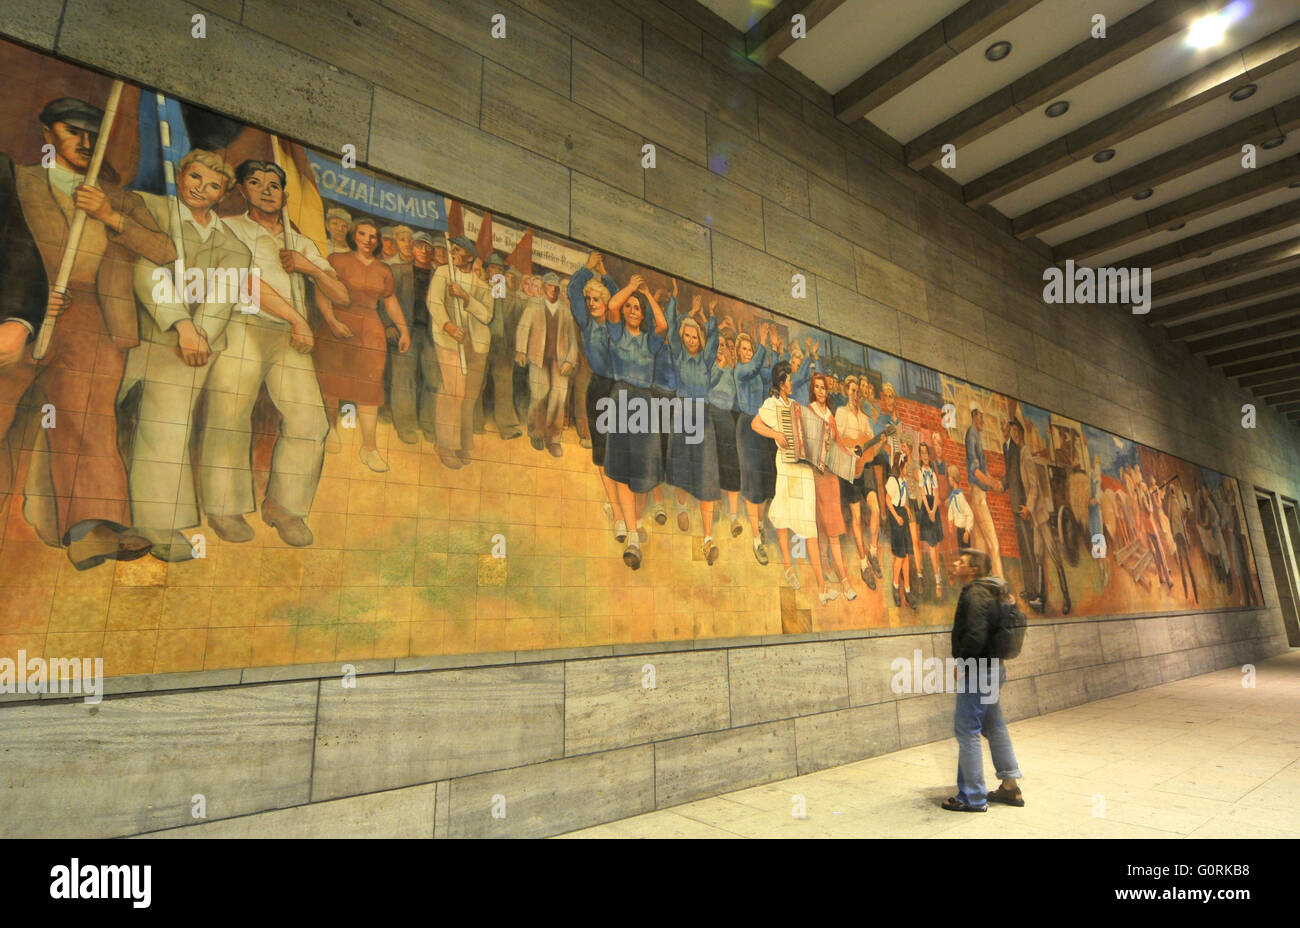 Vision of the socialism, wall frieze, mural, wall painting, by Max Lingner, Detlev-Rohwedder-Haus, Leipziger Strasse, Mitte, Berlin, Germany / Detlev Rohwedder House, Federal Ministry of Finance, Bundesministerium der Finanzen Stock Photo